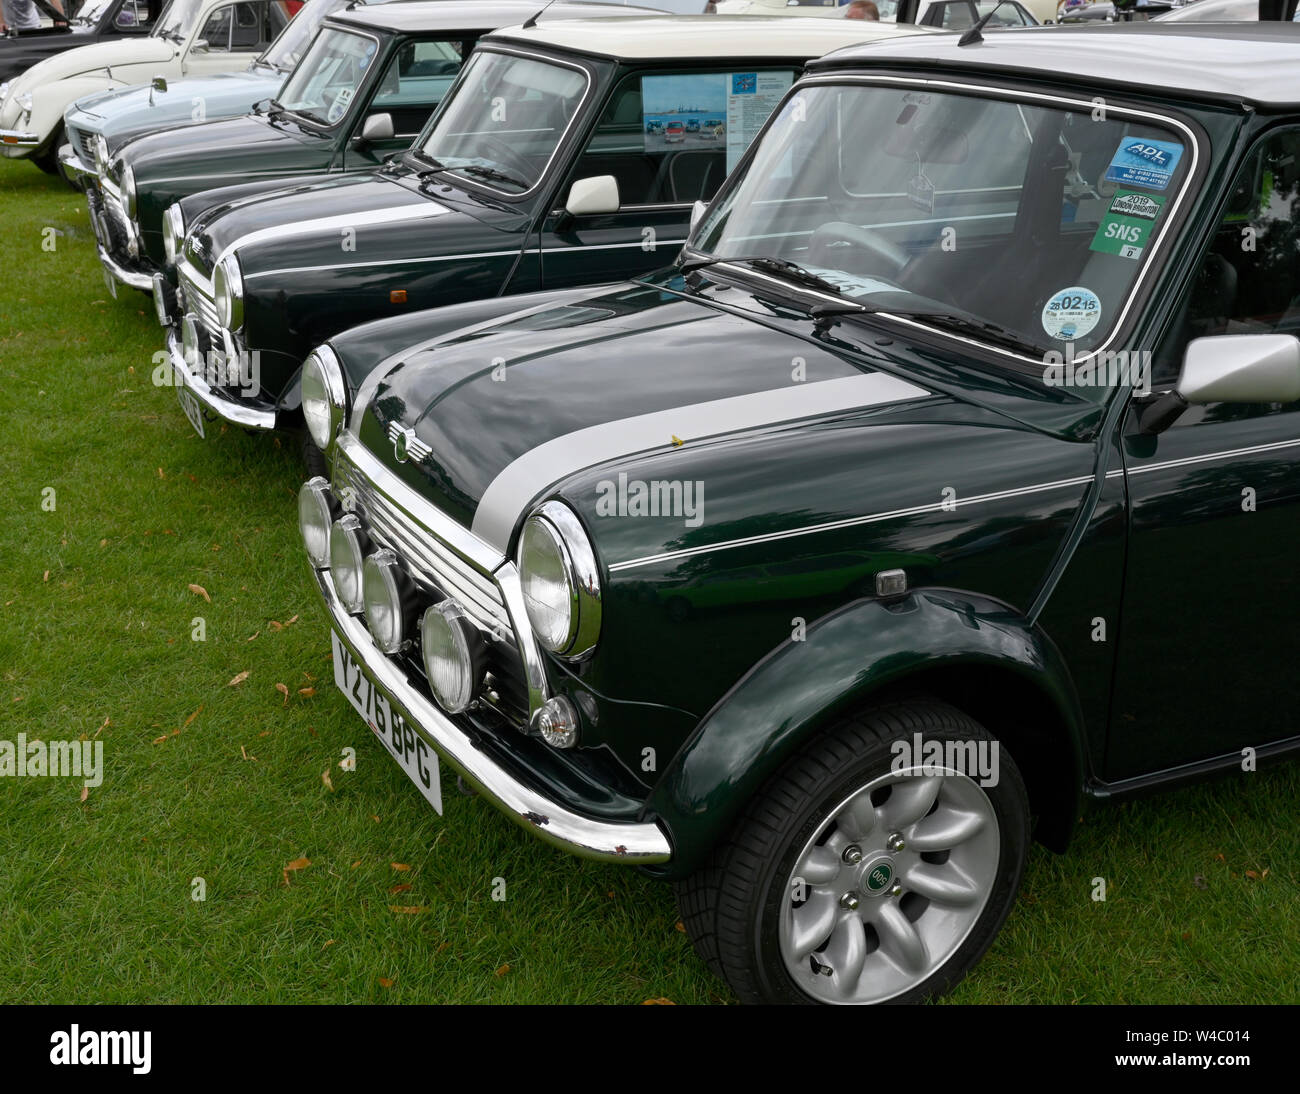 Line of vintage mini motor cars at a public motor show. Stock Photo